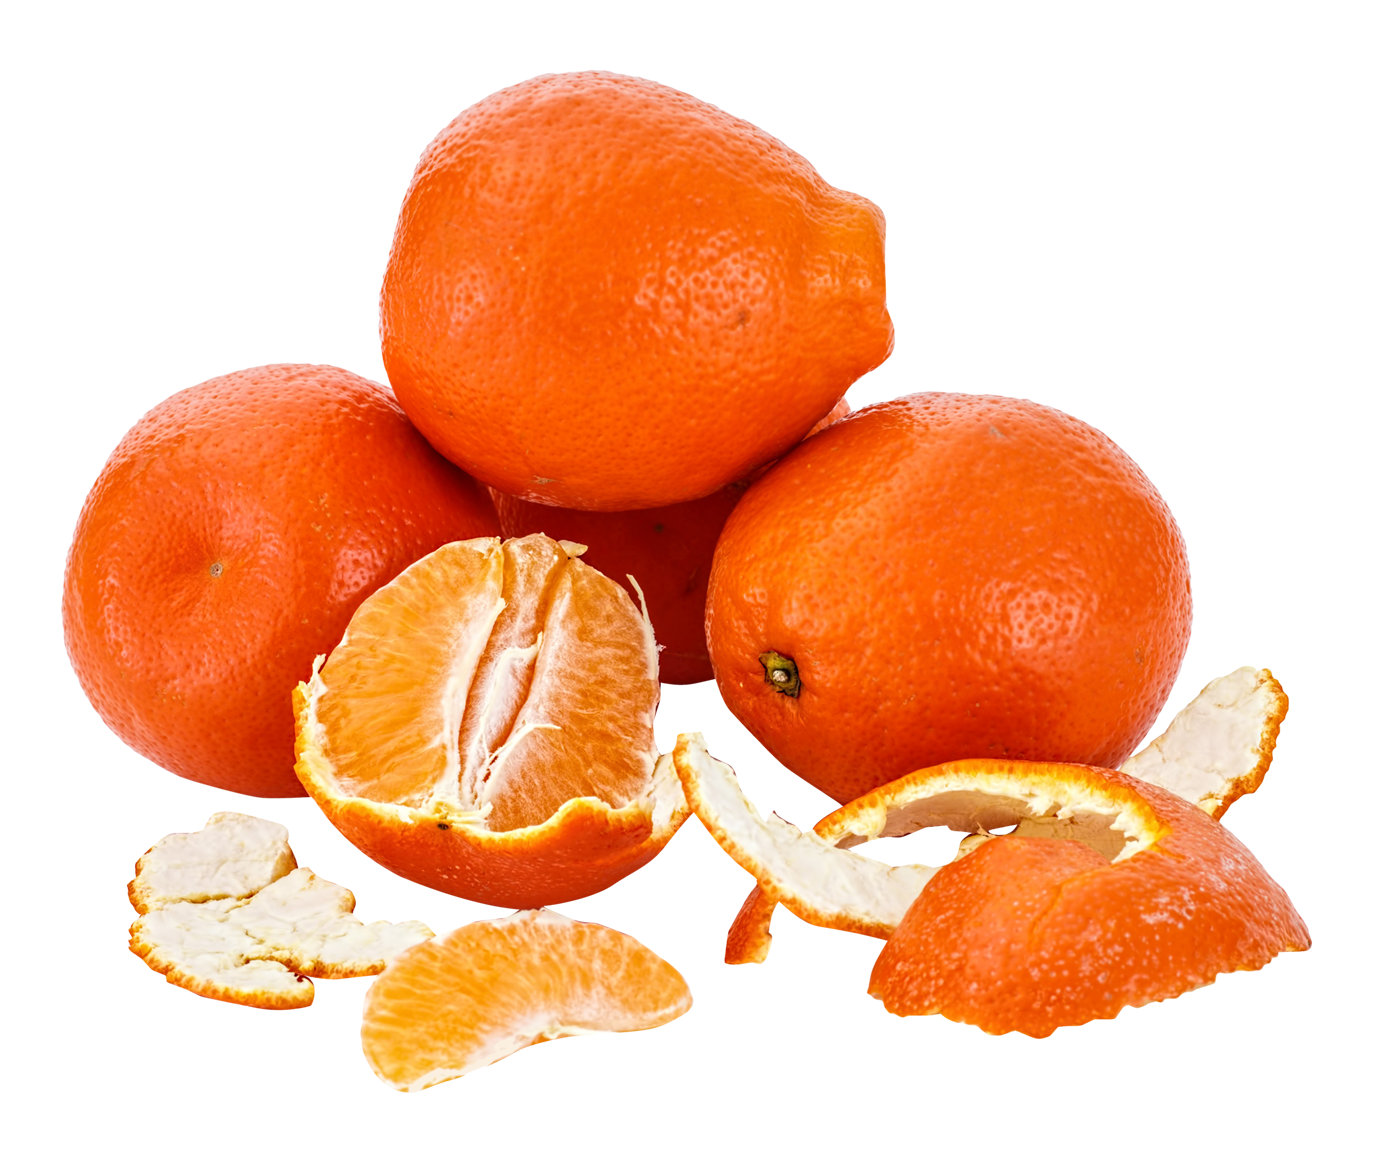 A Group Of Oranges With Peeled Oranges